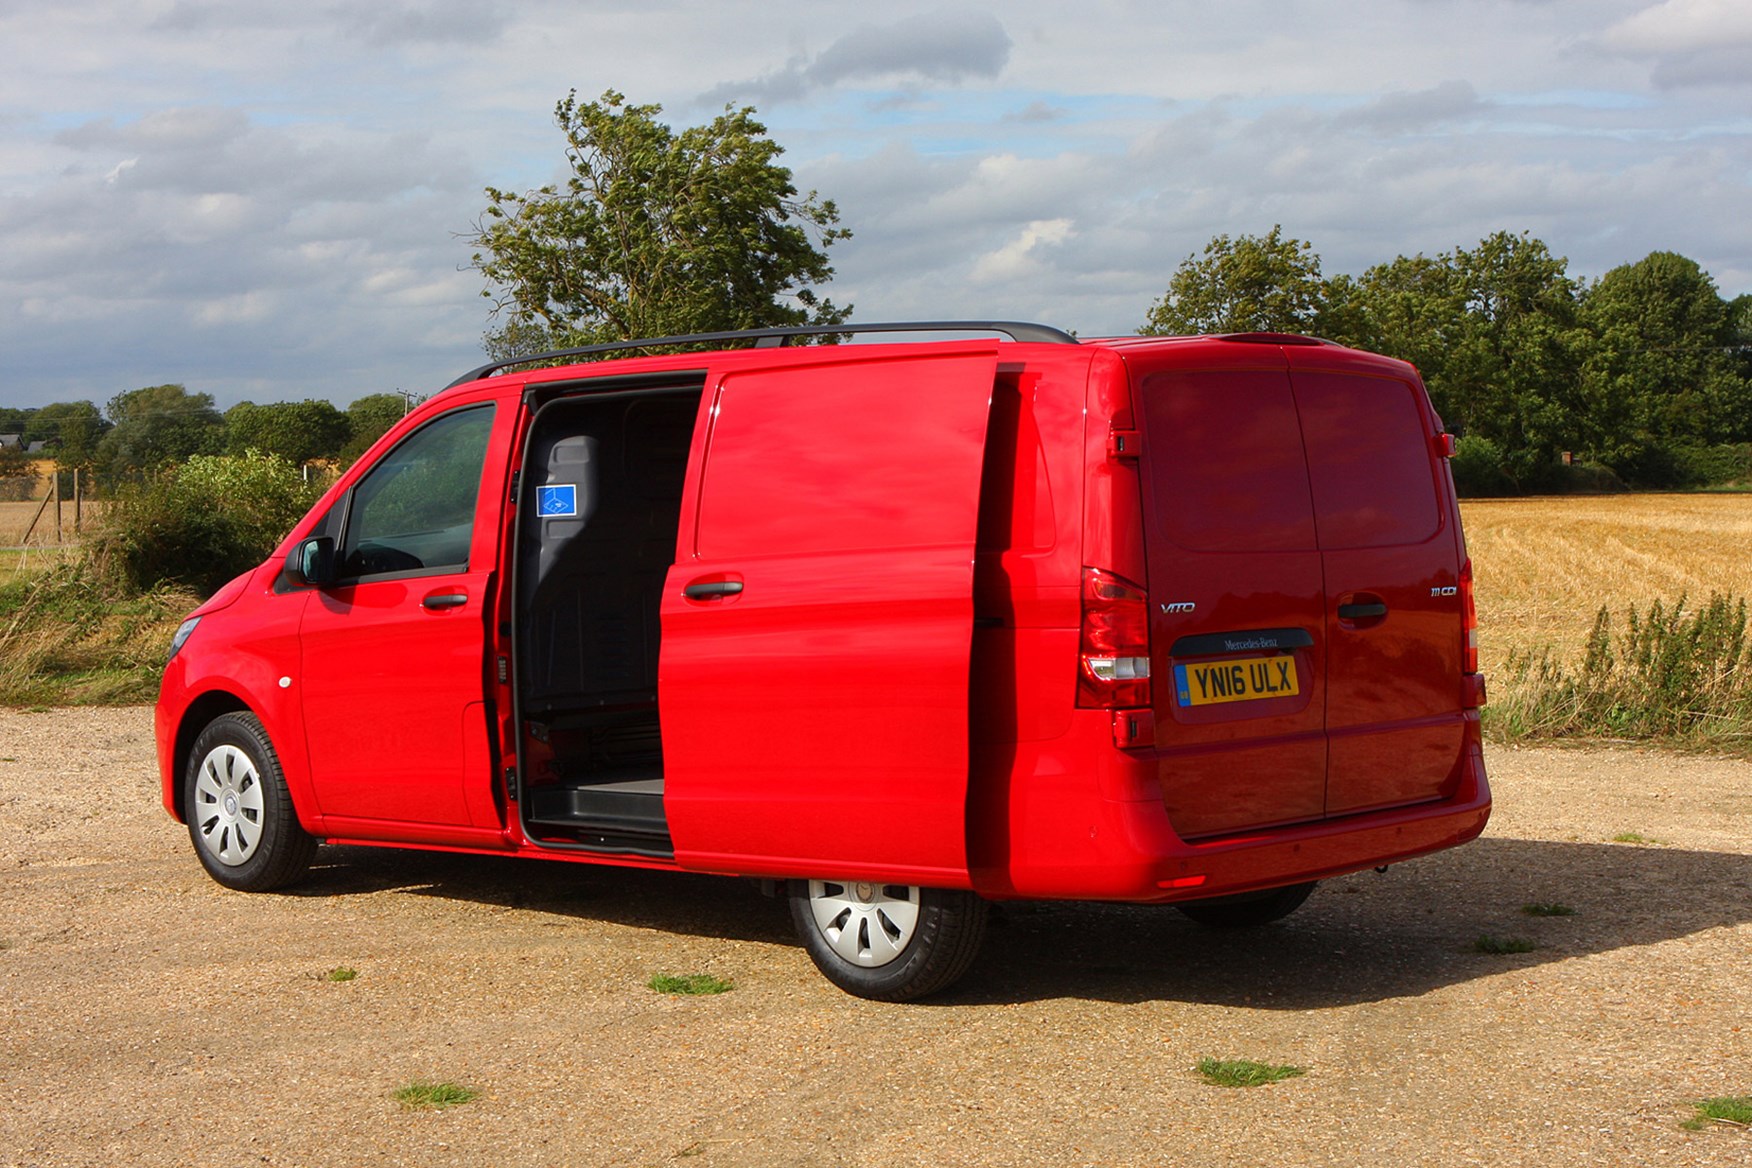 Mercedes-Benz Vito full review on Parkers Vans - load area acces, rear